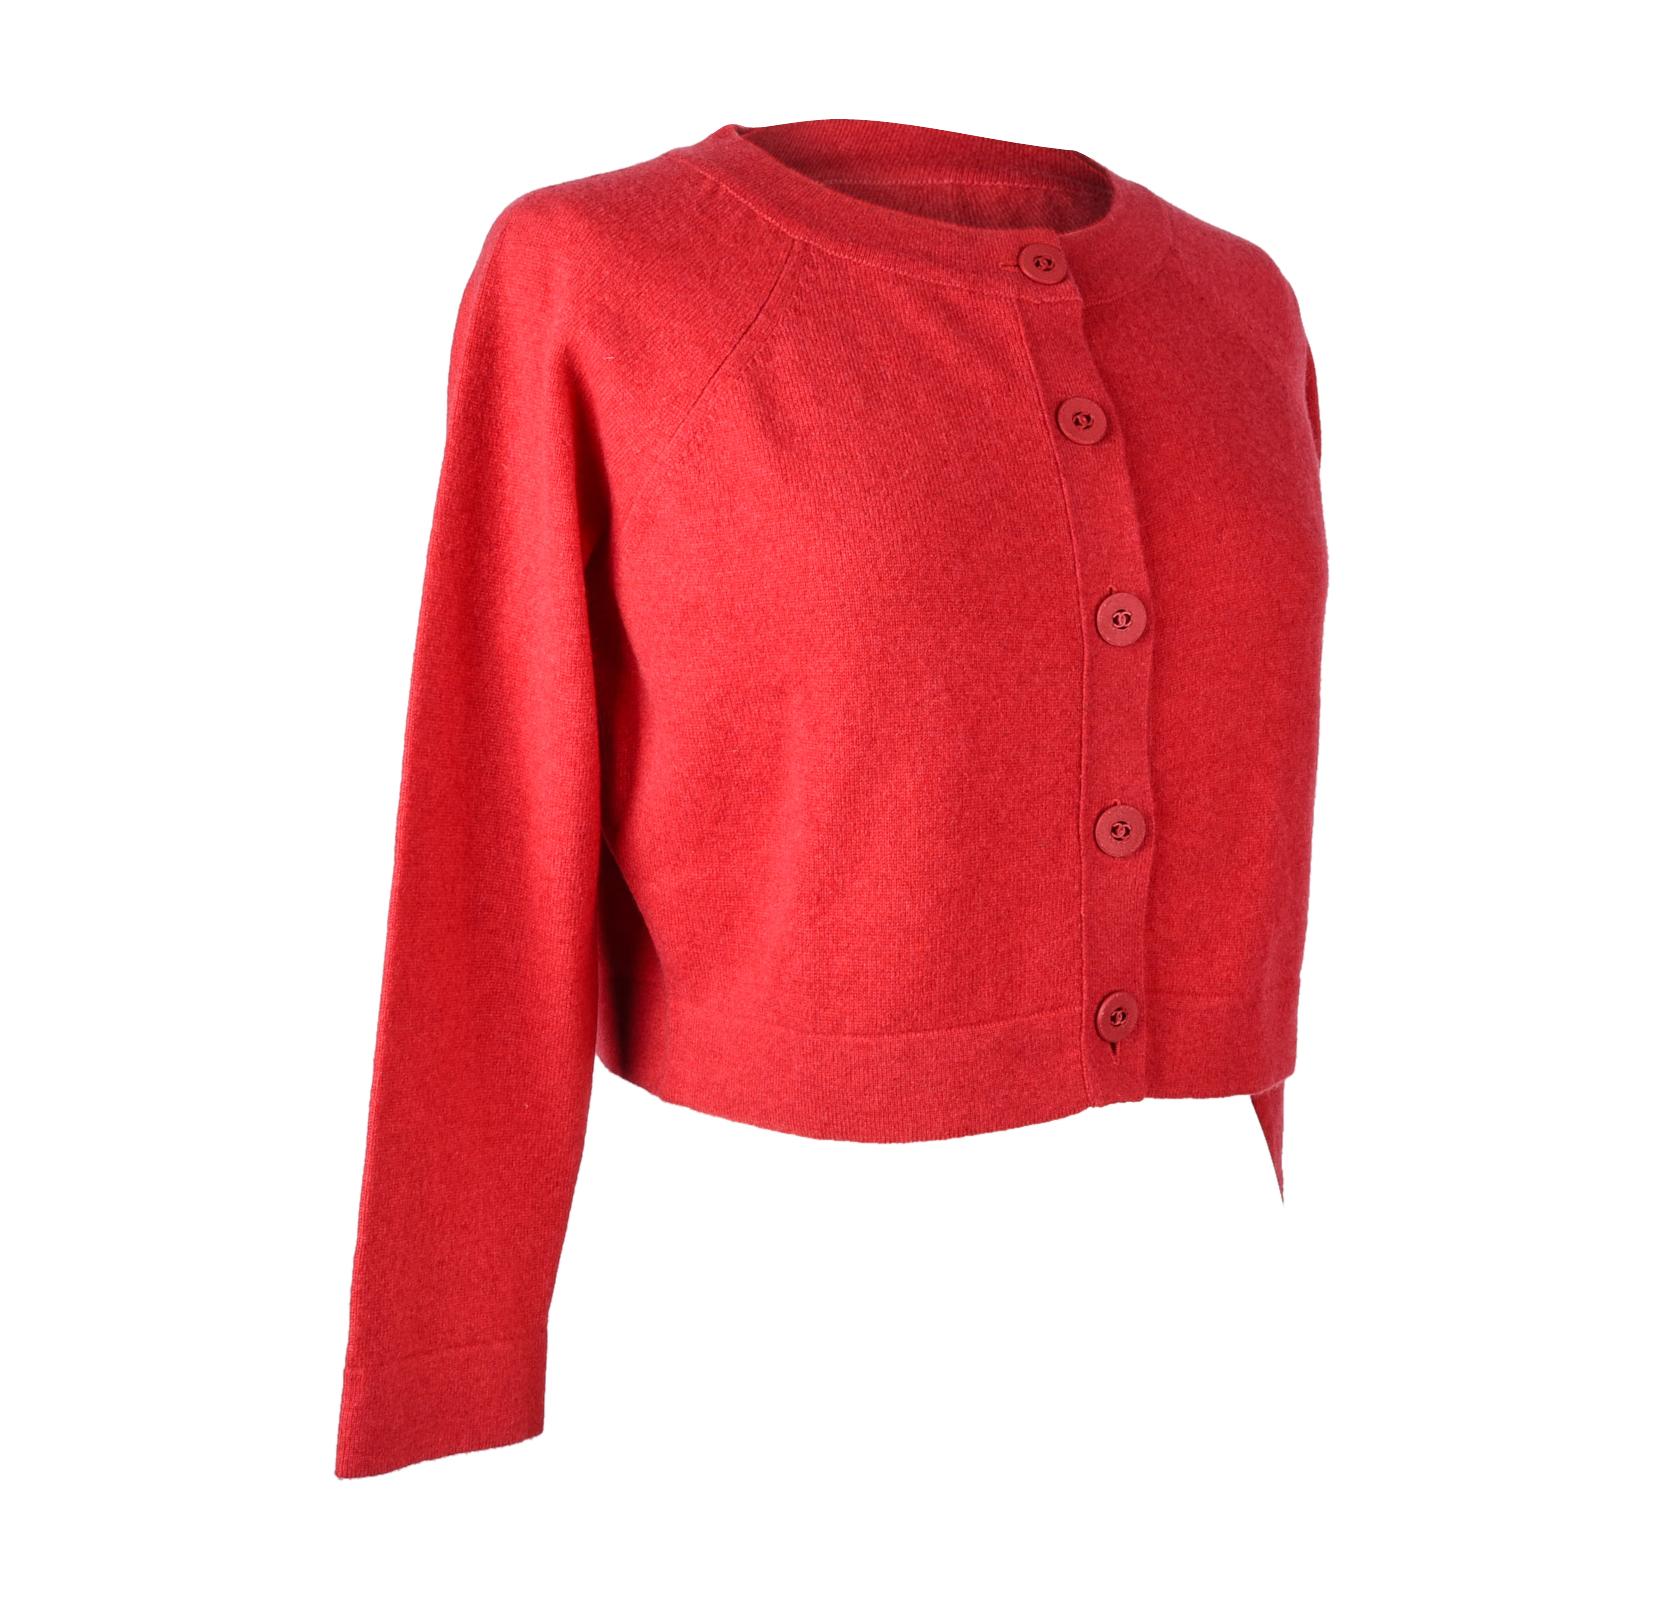 Chanel Cardigan Raspberry Pink Cashmere Cropped 40 / 8